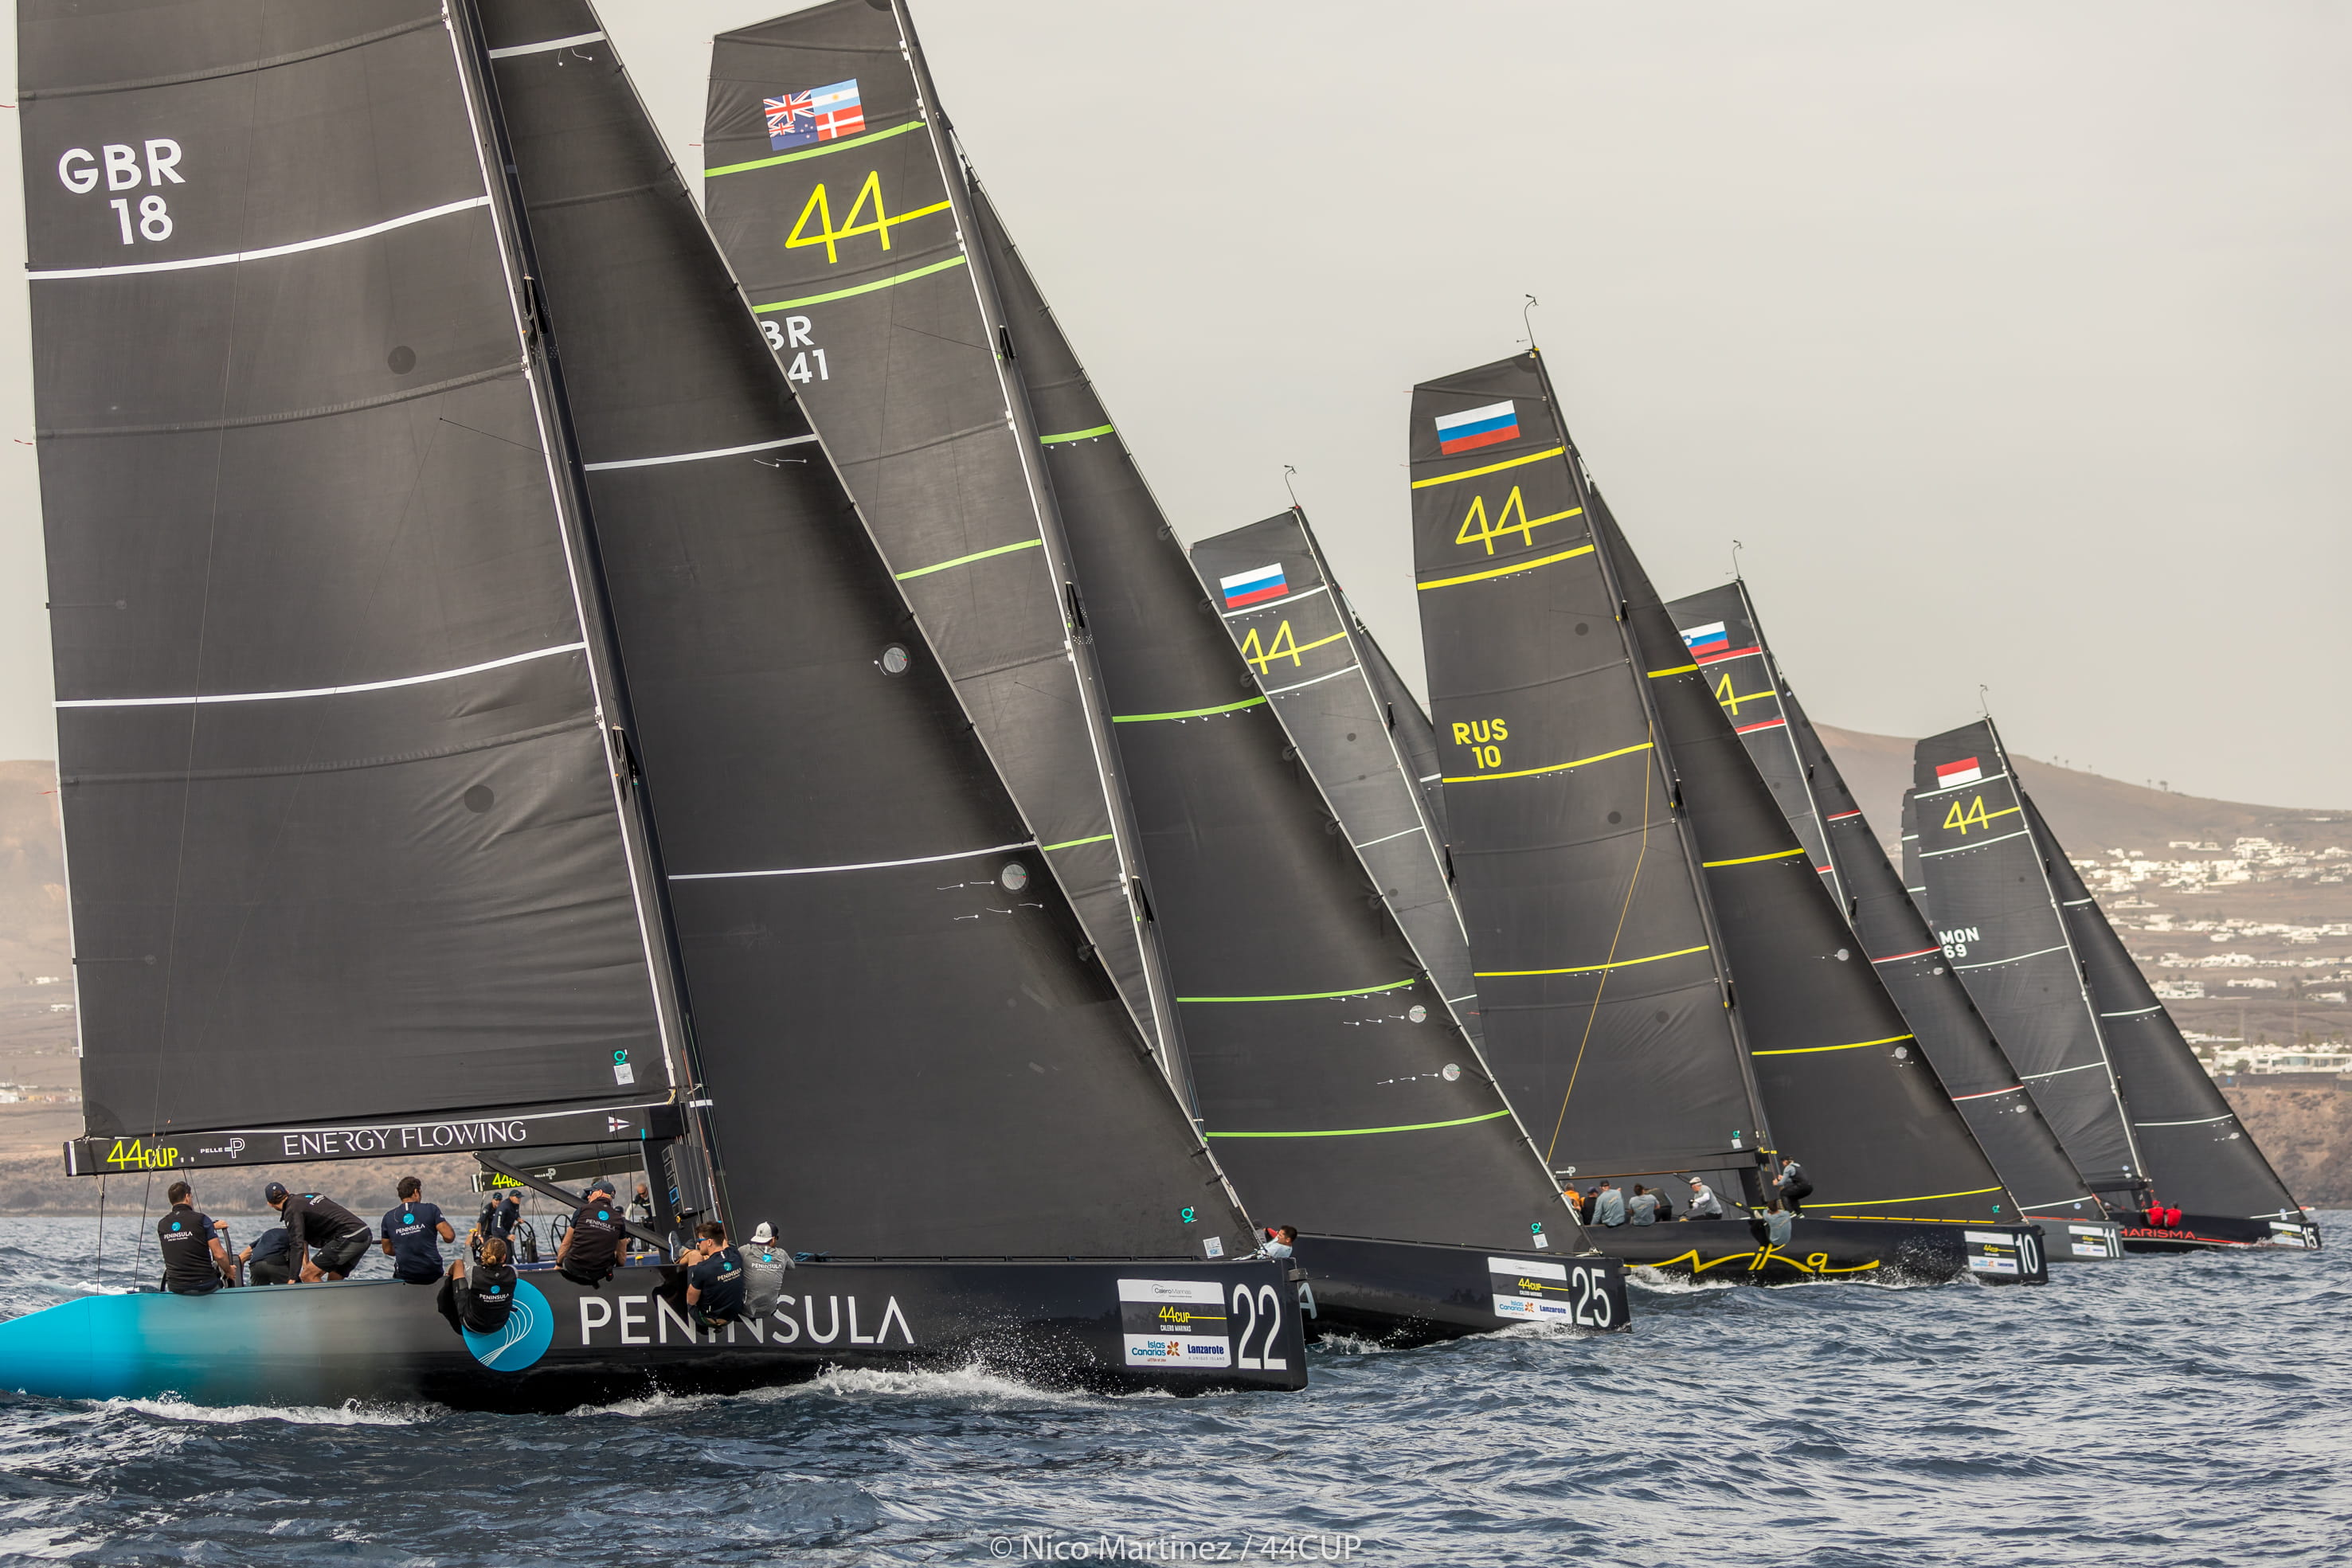 Oman Sail gears up to host the 44Cup Grand Final